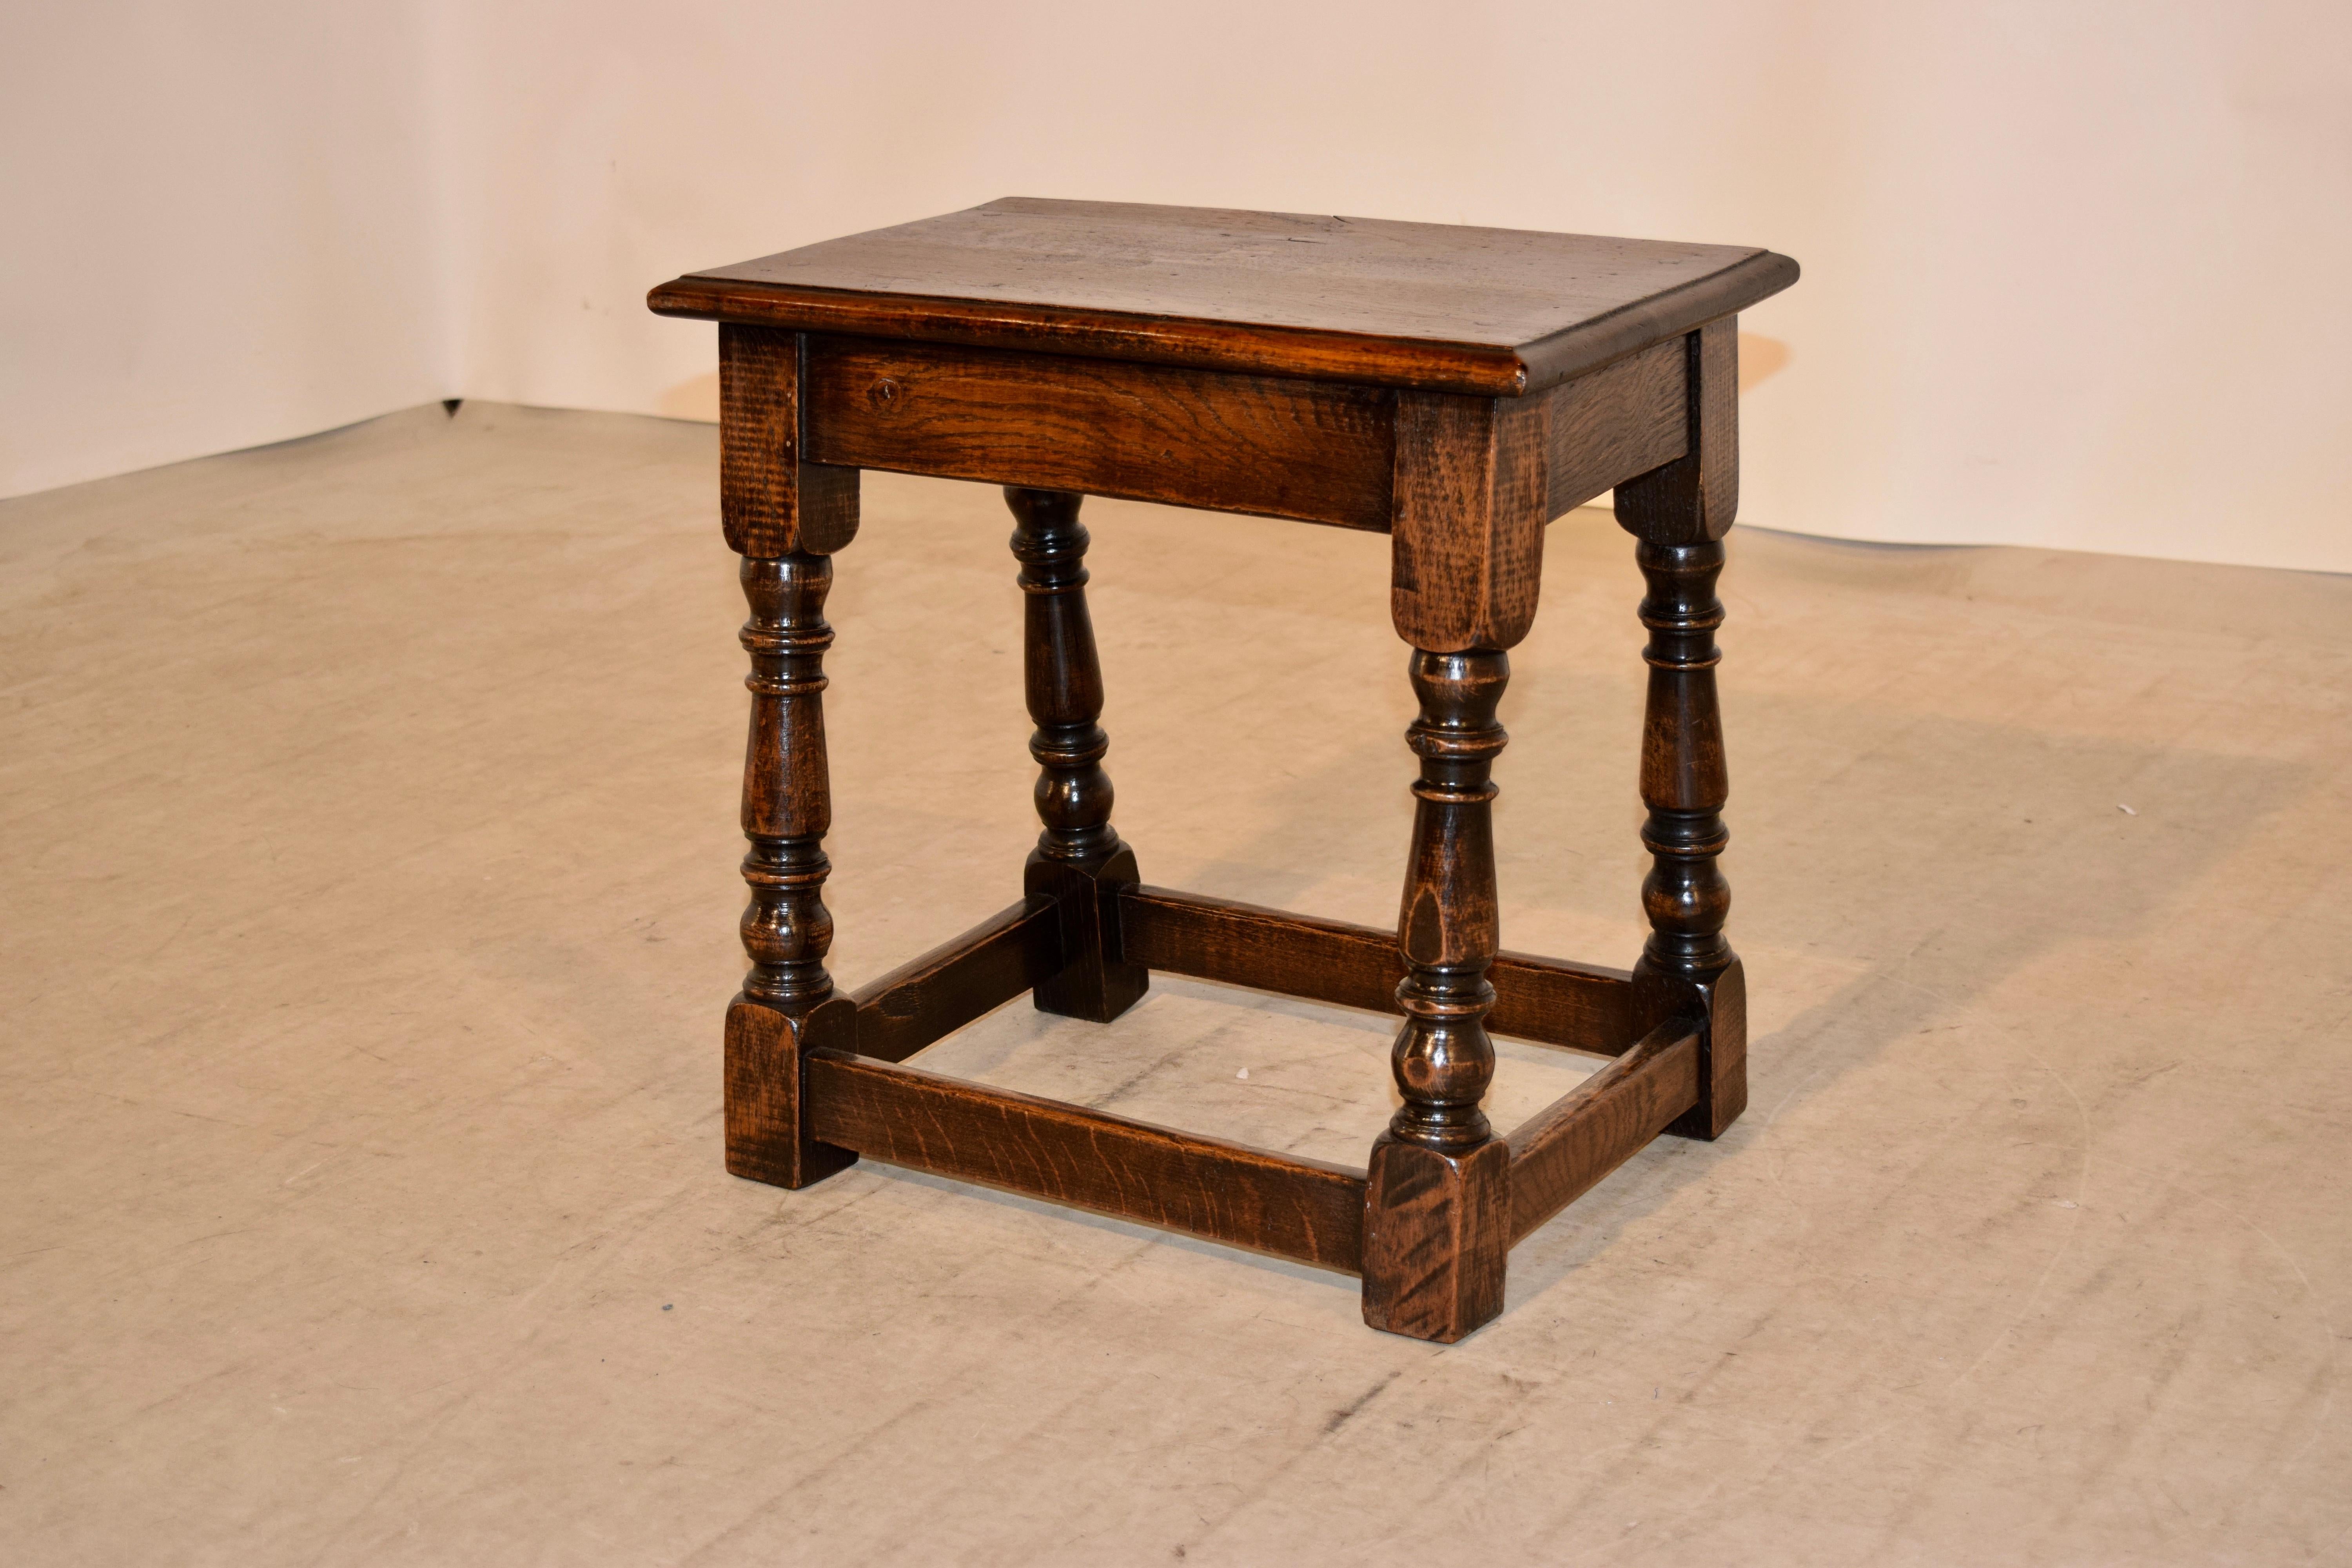 19th century oak joint stool from England with a bevelled edge around the top following down to a simple apron and hand turned splayed legs, joined by stretchers. Pegged construction.